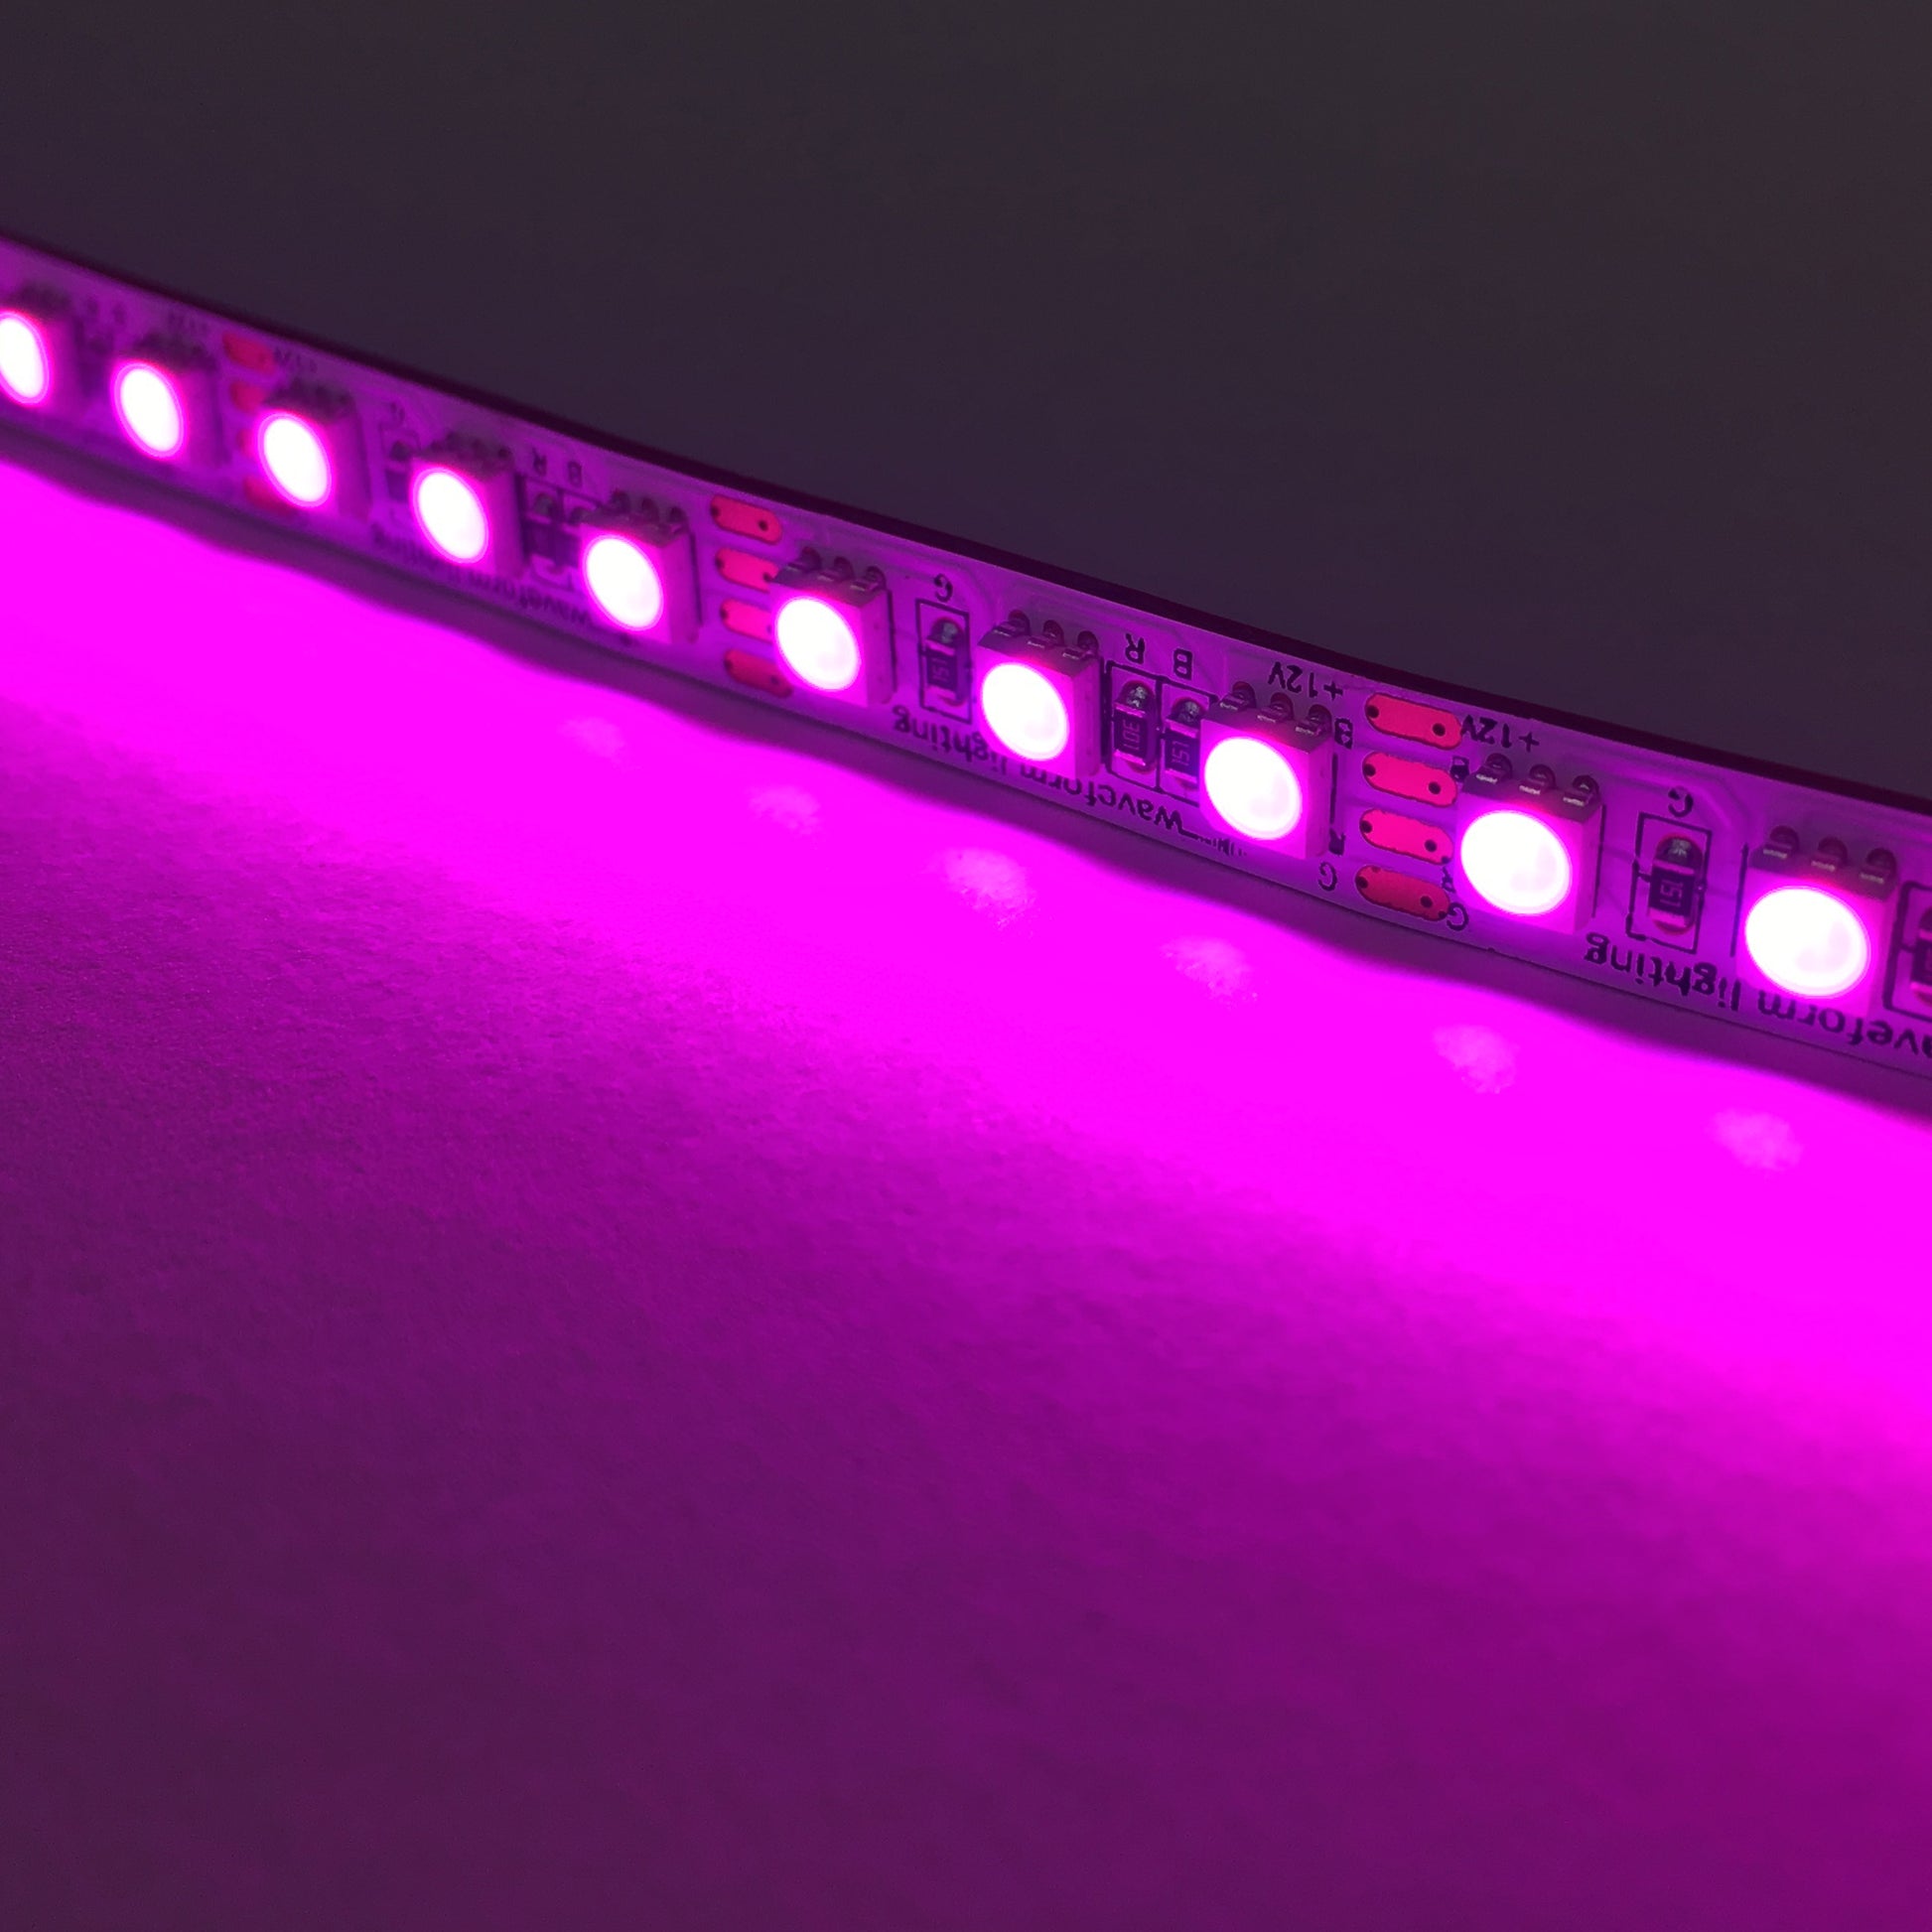 LED Colour Lighting Overview